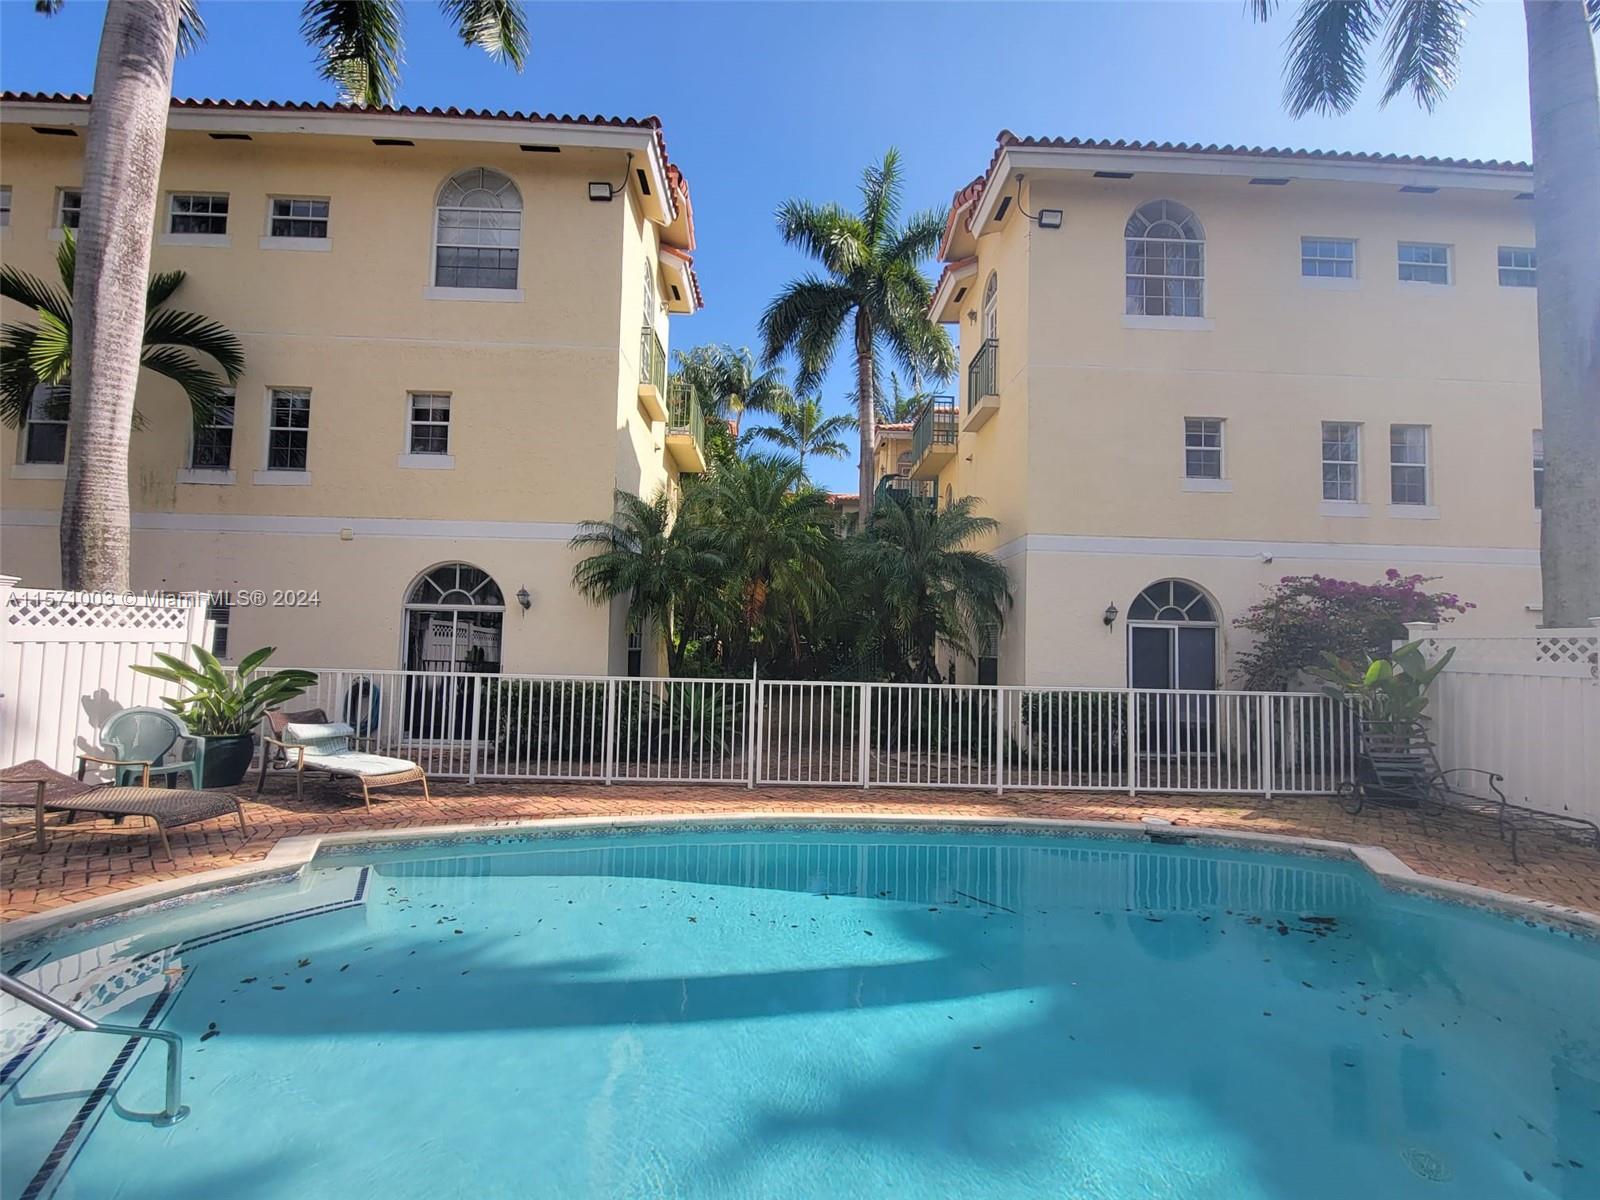 Cozy Spanish-style condo-townhouse in Coconut Grove. It is located in a private gated community with a two-story layout, offering relaxing garden and pool views. It is a corner unit with a spacious floor plan and plenty of natural light. The ground floor includes a half bathroom and ceramic flooring, while the upper level features 2 bathrooms and 2 bedrooms with wooden floors, a walk-in closet in the master bedroom, and a 16-foot high ceiling. This boutique community, private and peaceful with only 16 units, is surrounded by beautiful trees and bougainvillea.